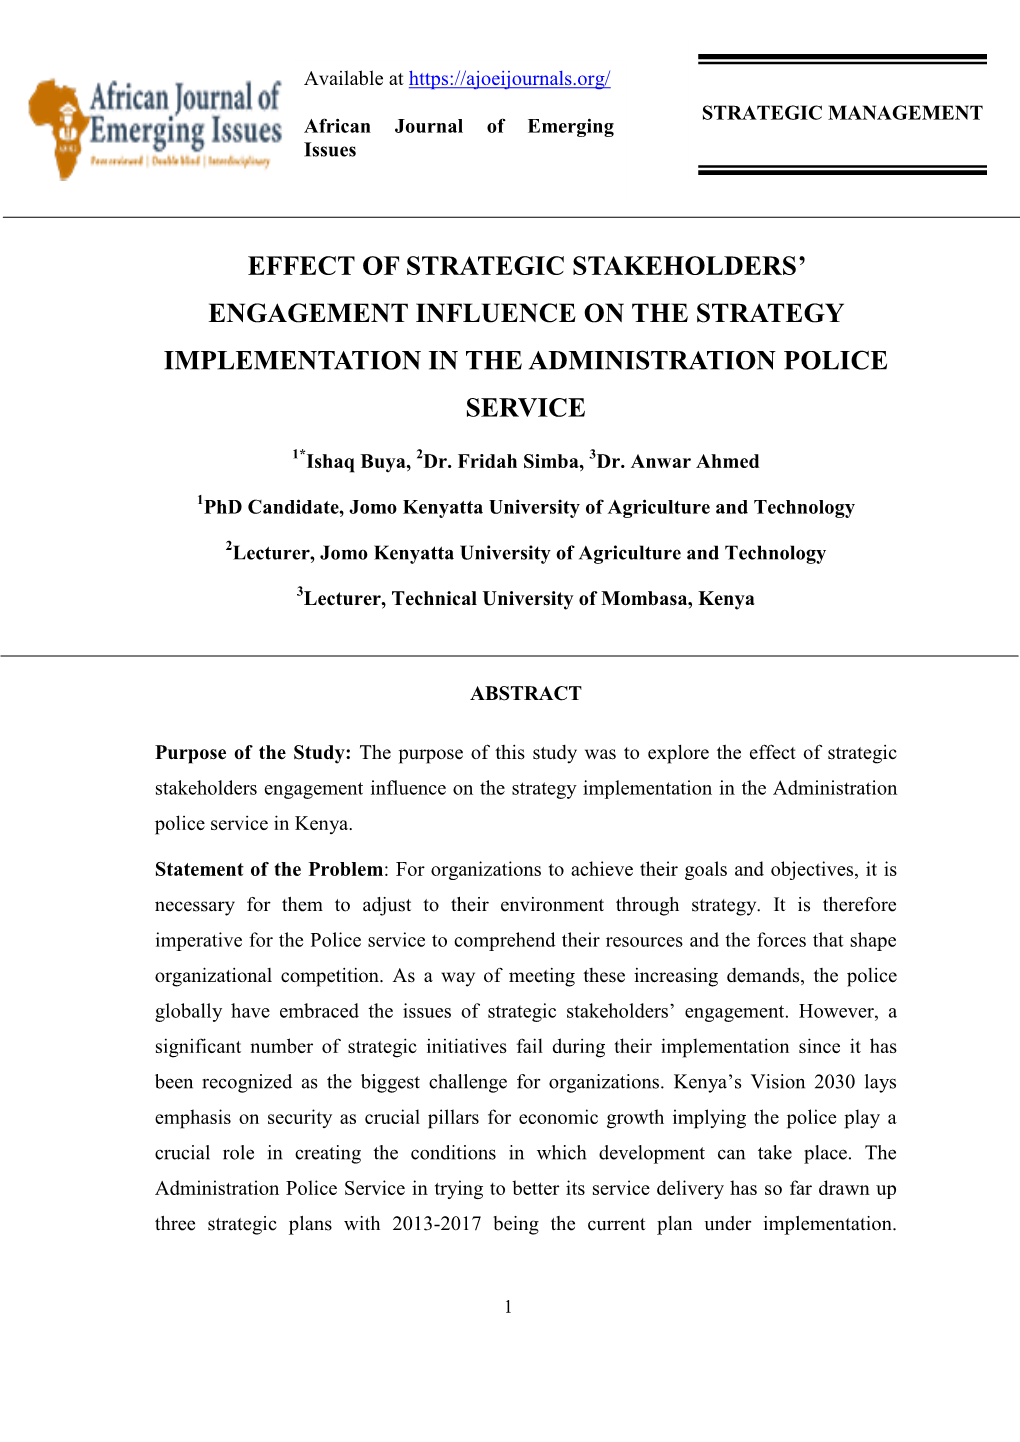 Effect of Strategic Stakeholders' Engagement Influence on The